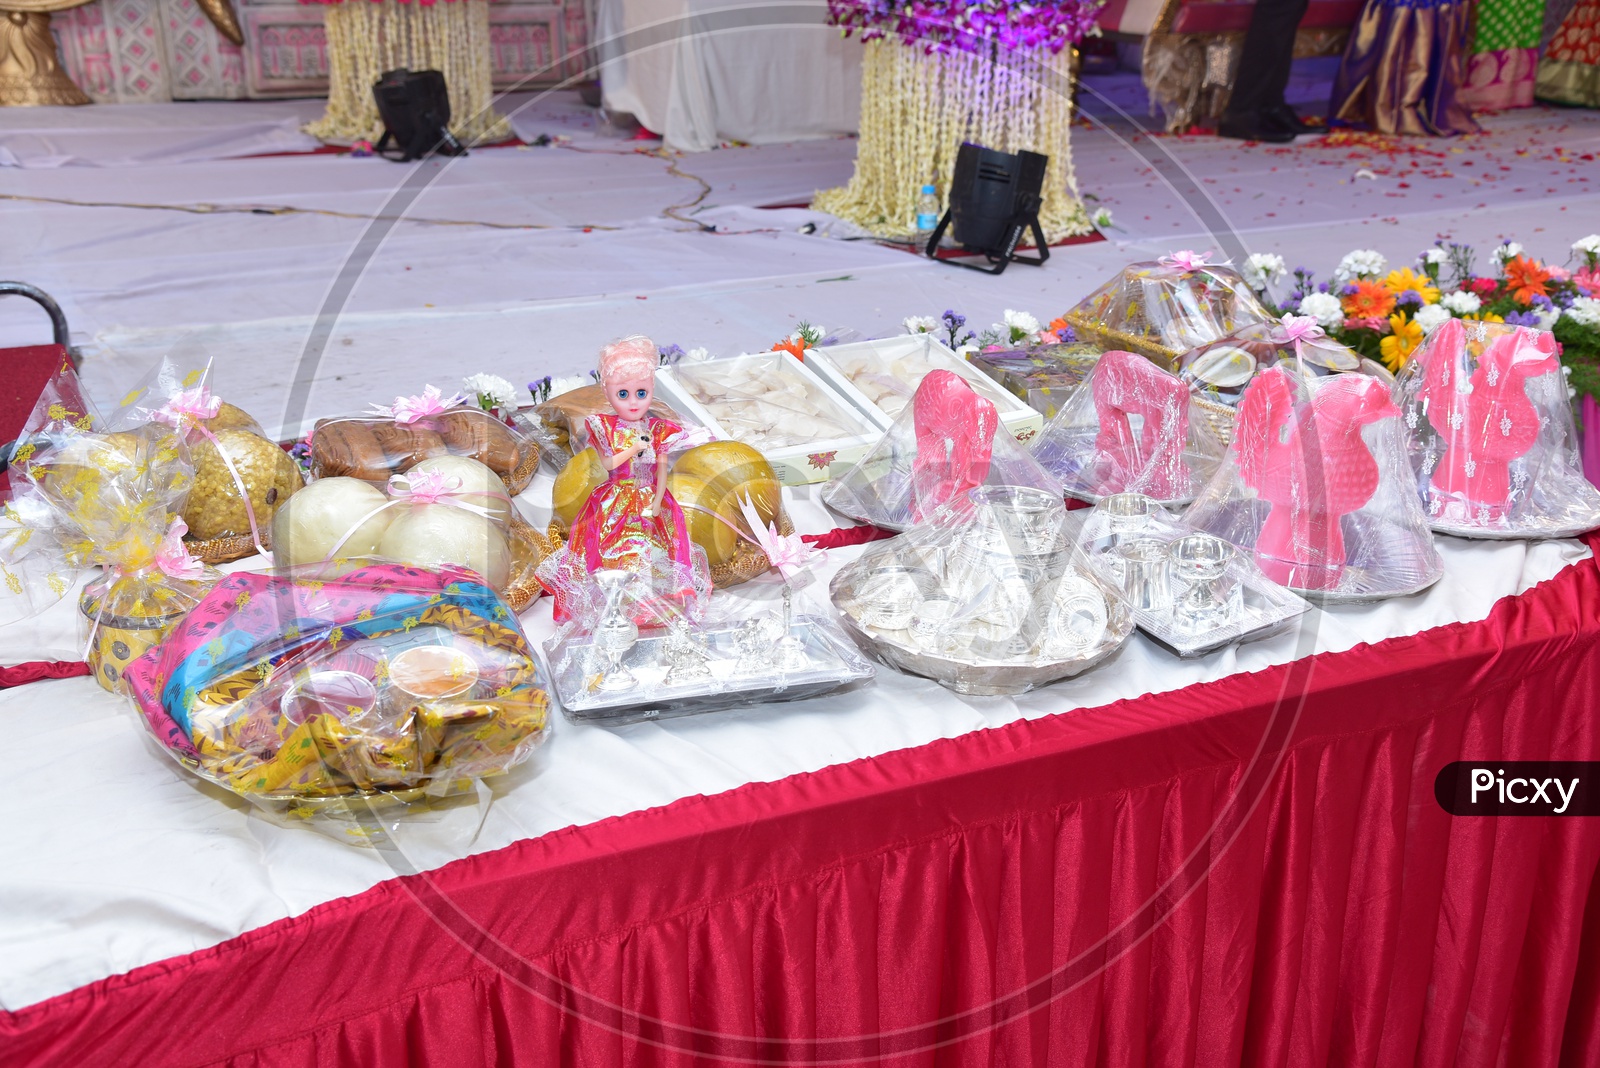 Ritual Items  On a Table At a Wedding or Marriage